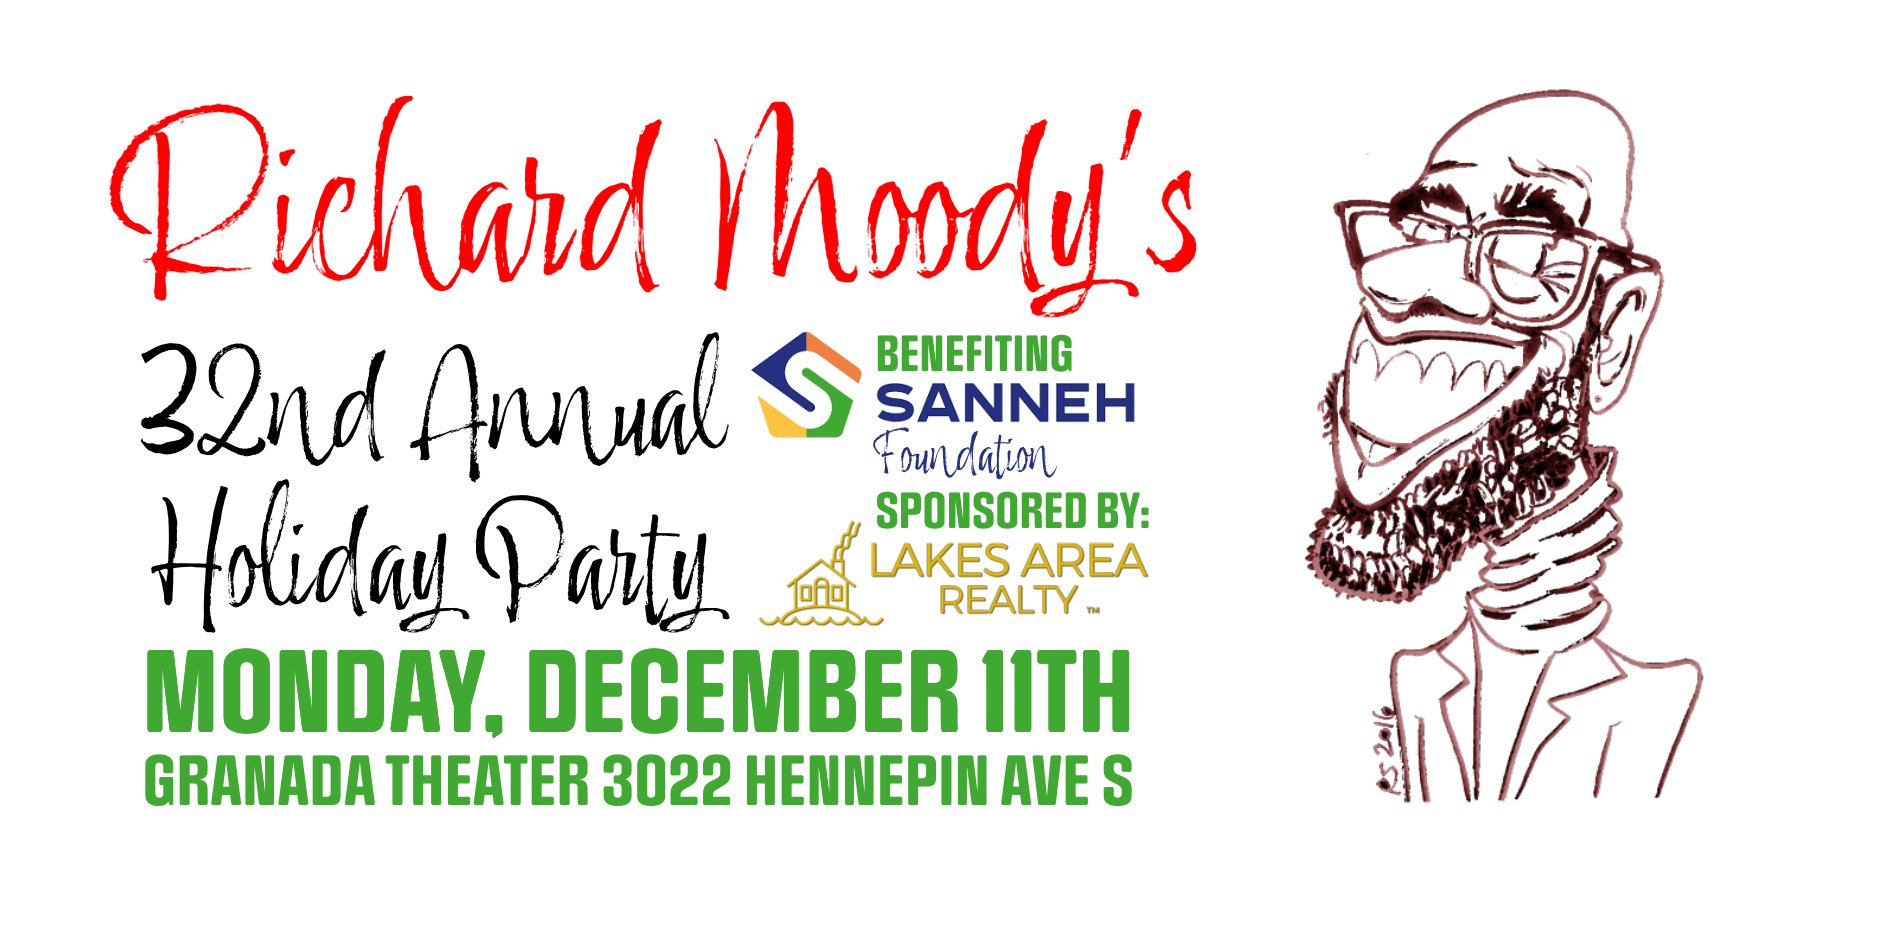 Richard Moody's 32nd Annual Holiday Party To Benefit The Sanneh Foundation